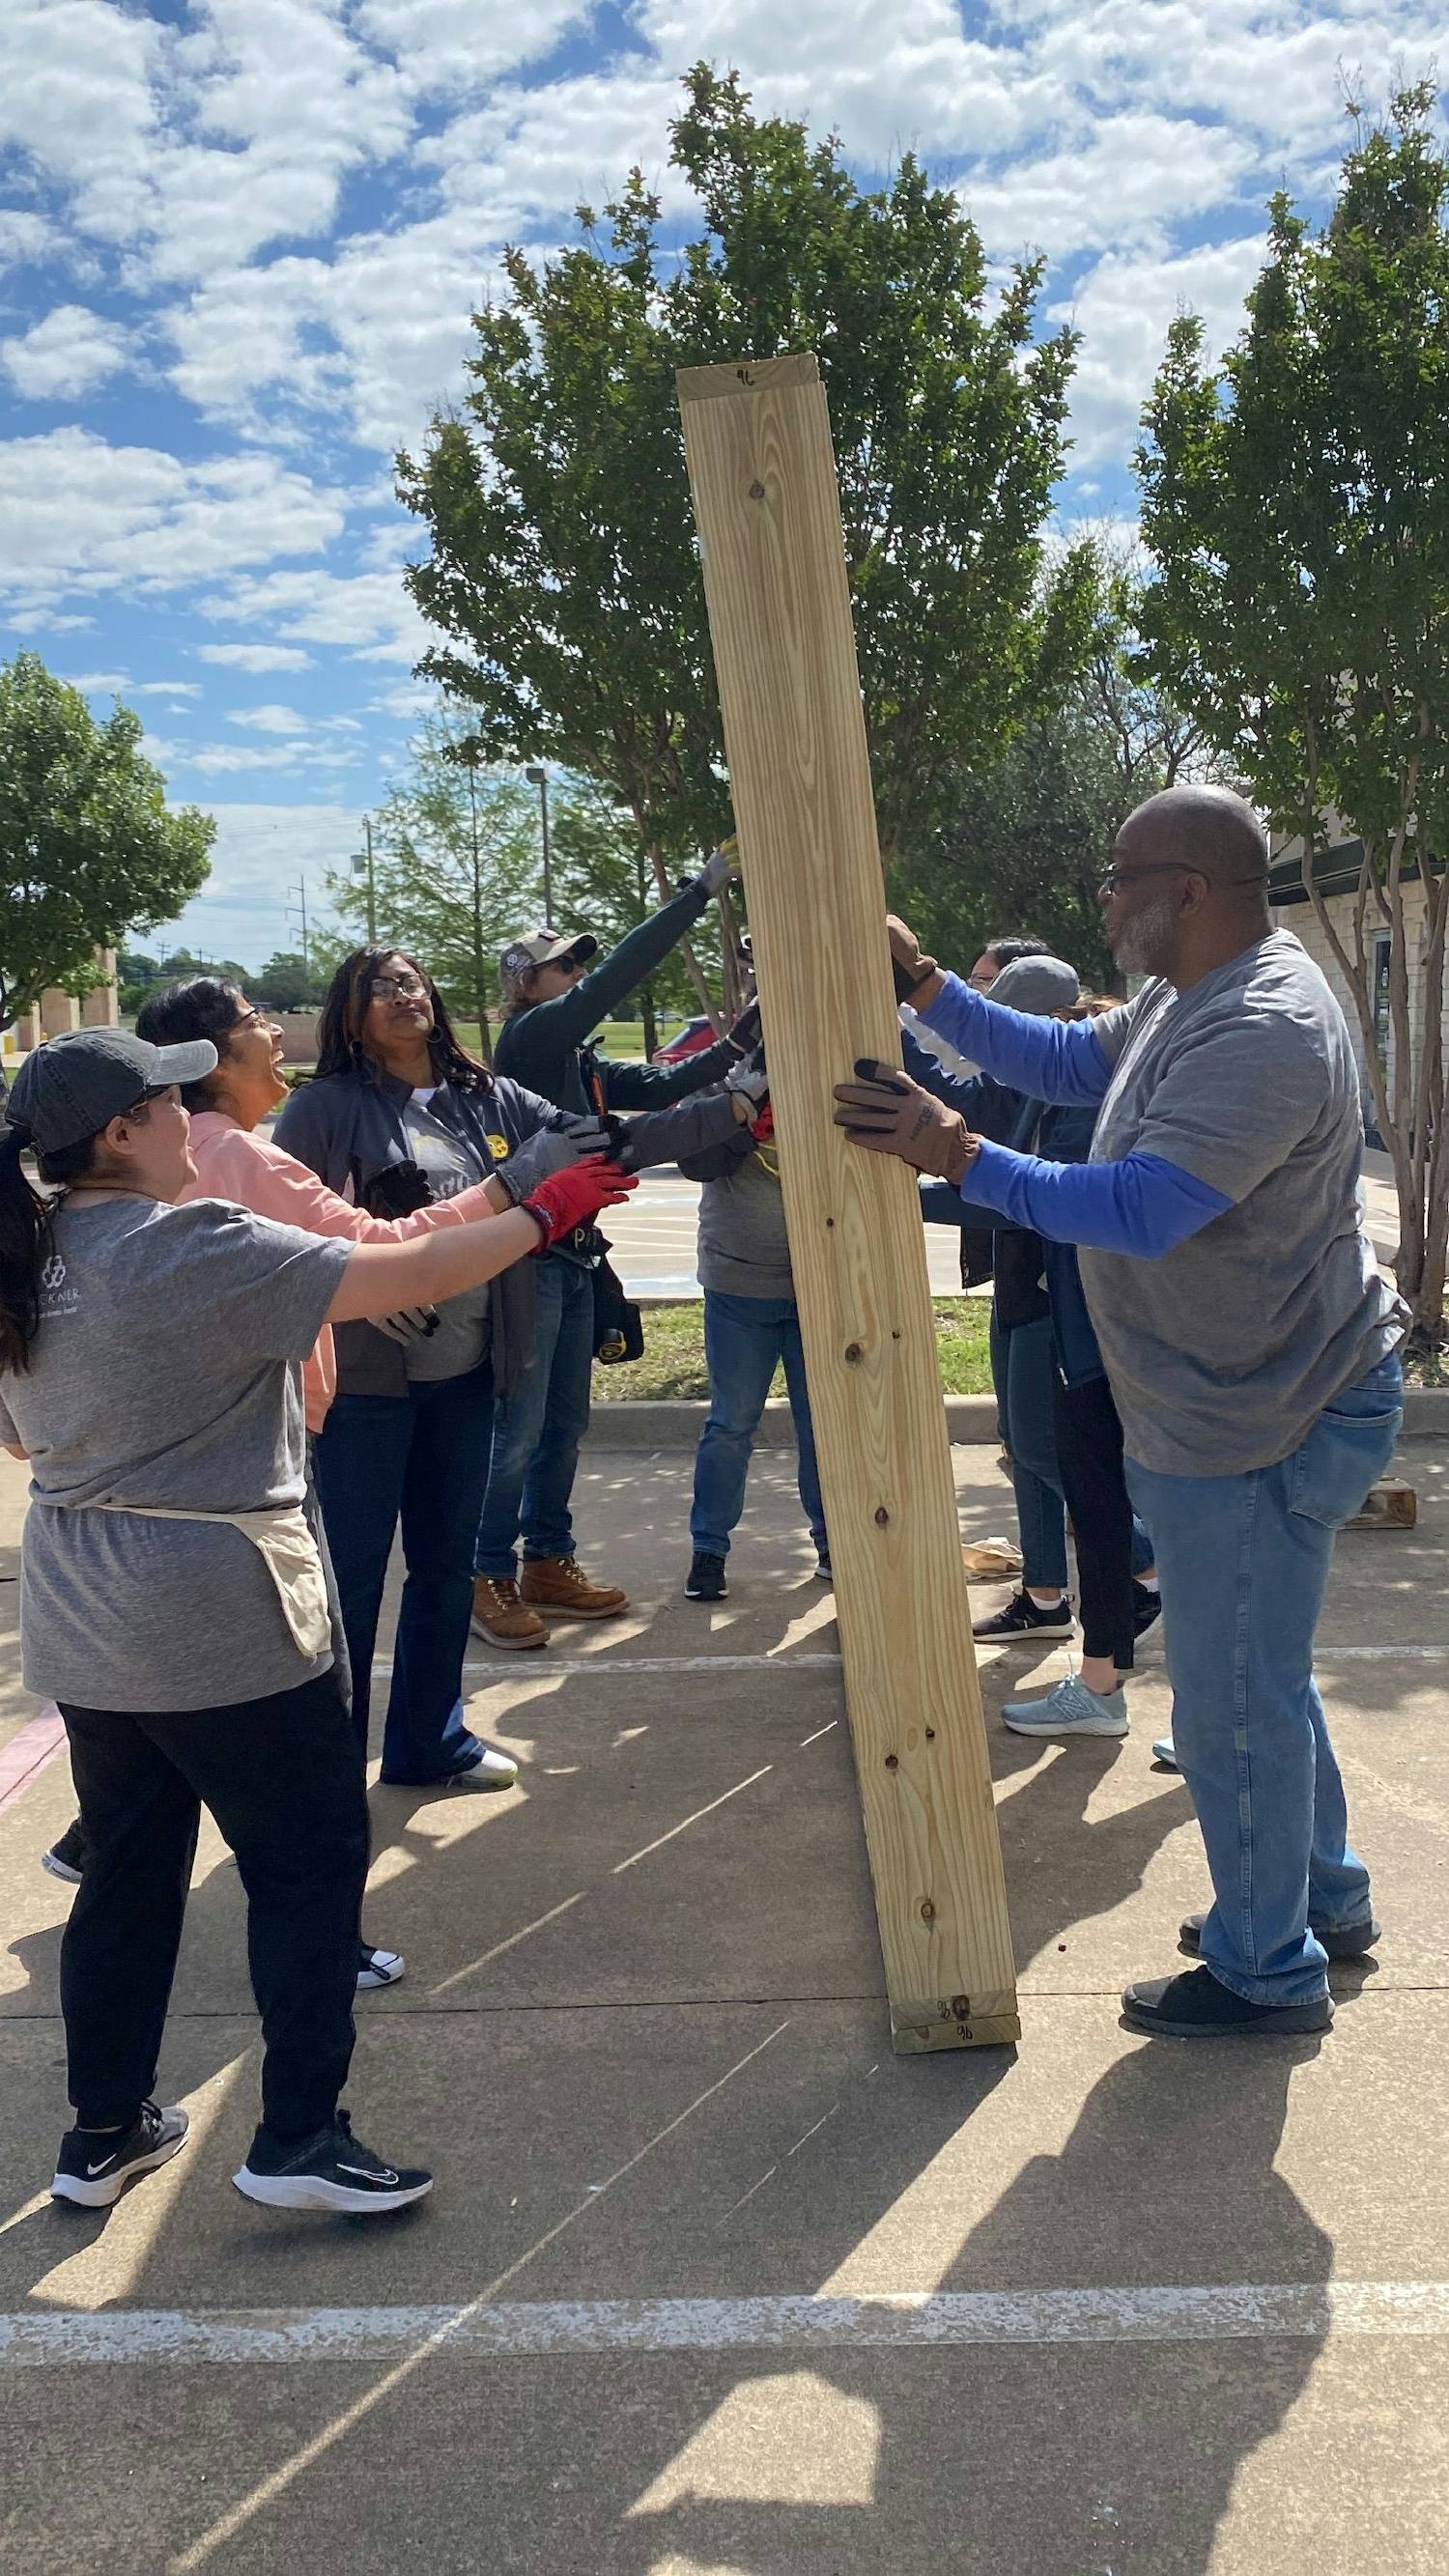 The Dallas team partners with our Missions team to help build a home for a vulnerable family in the Rio Grande Valley.